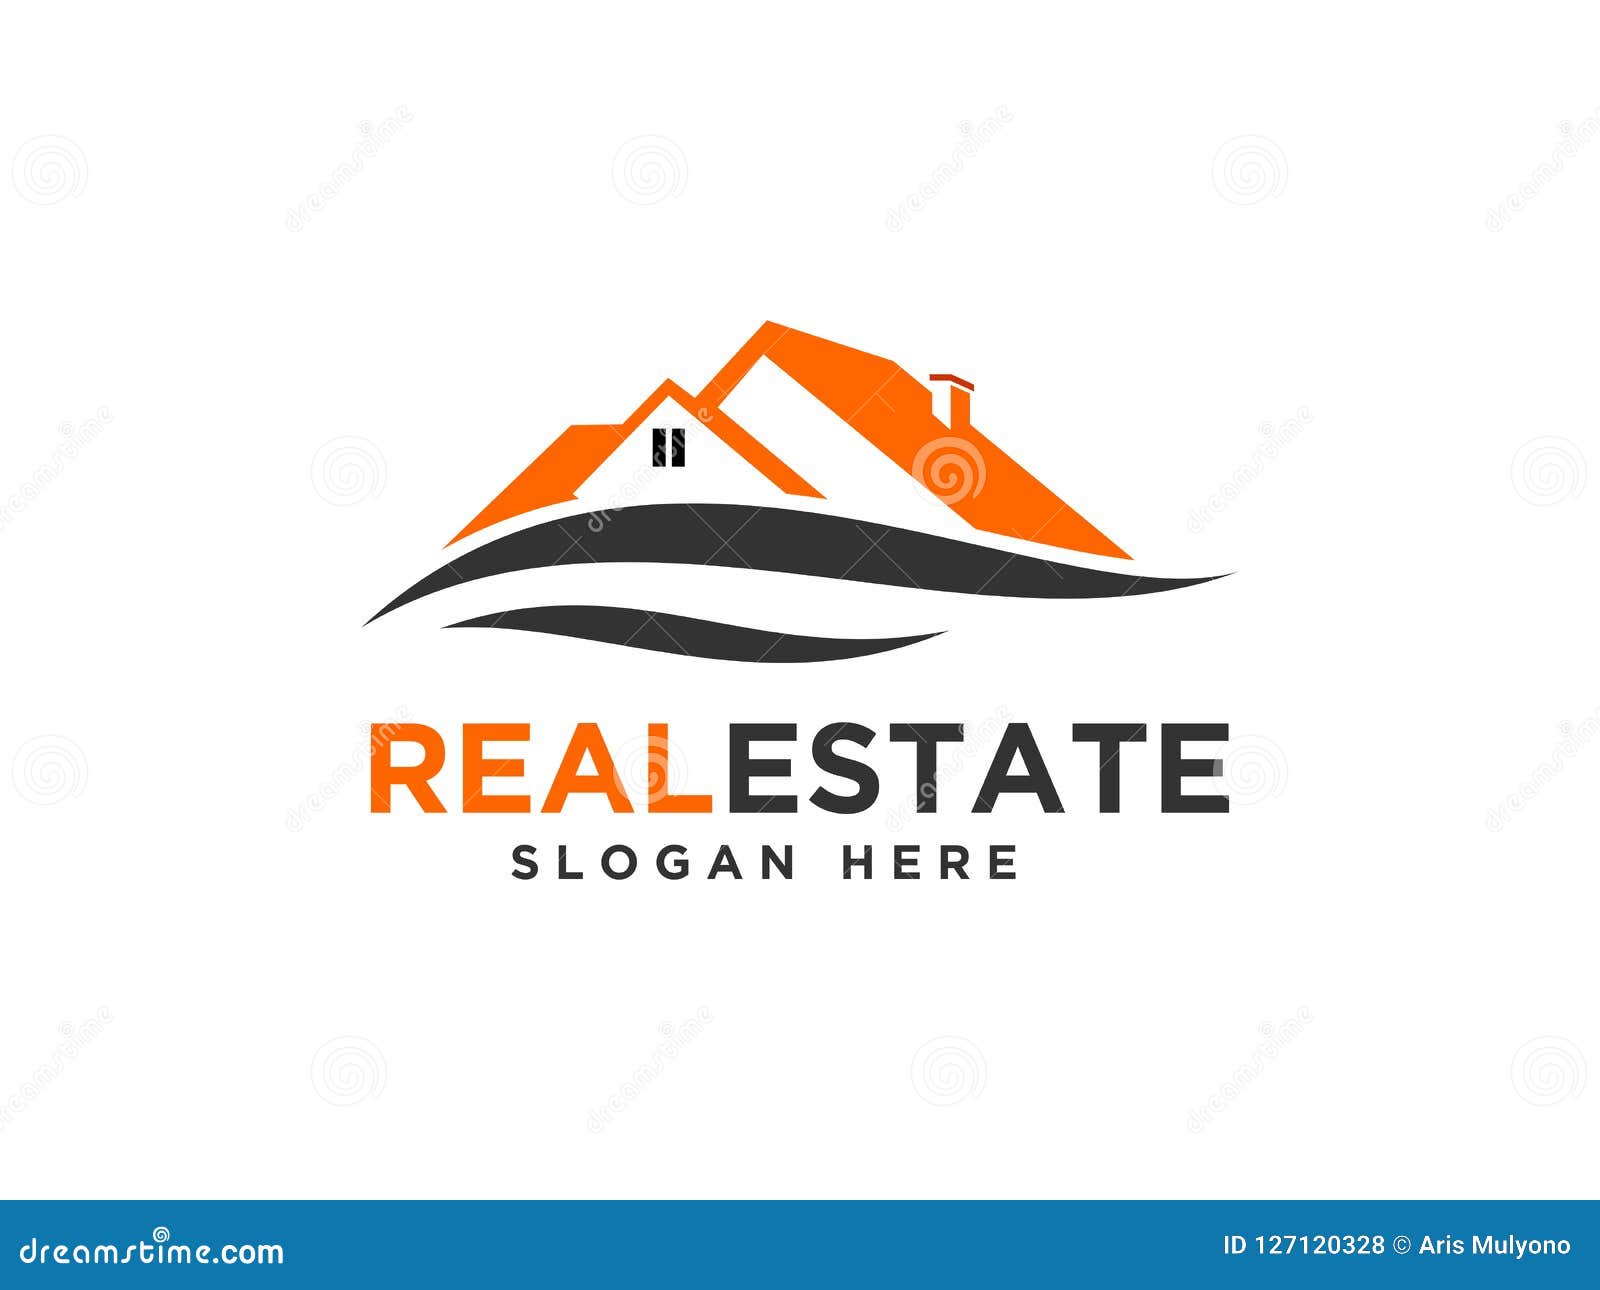 20 Best Real Estate Logo Designs You Can Get Inspiration From